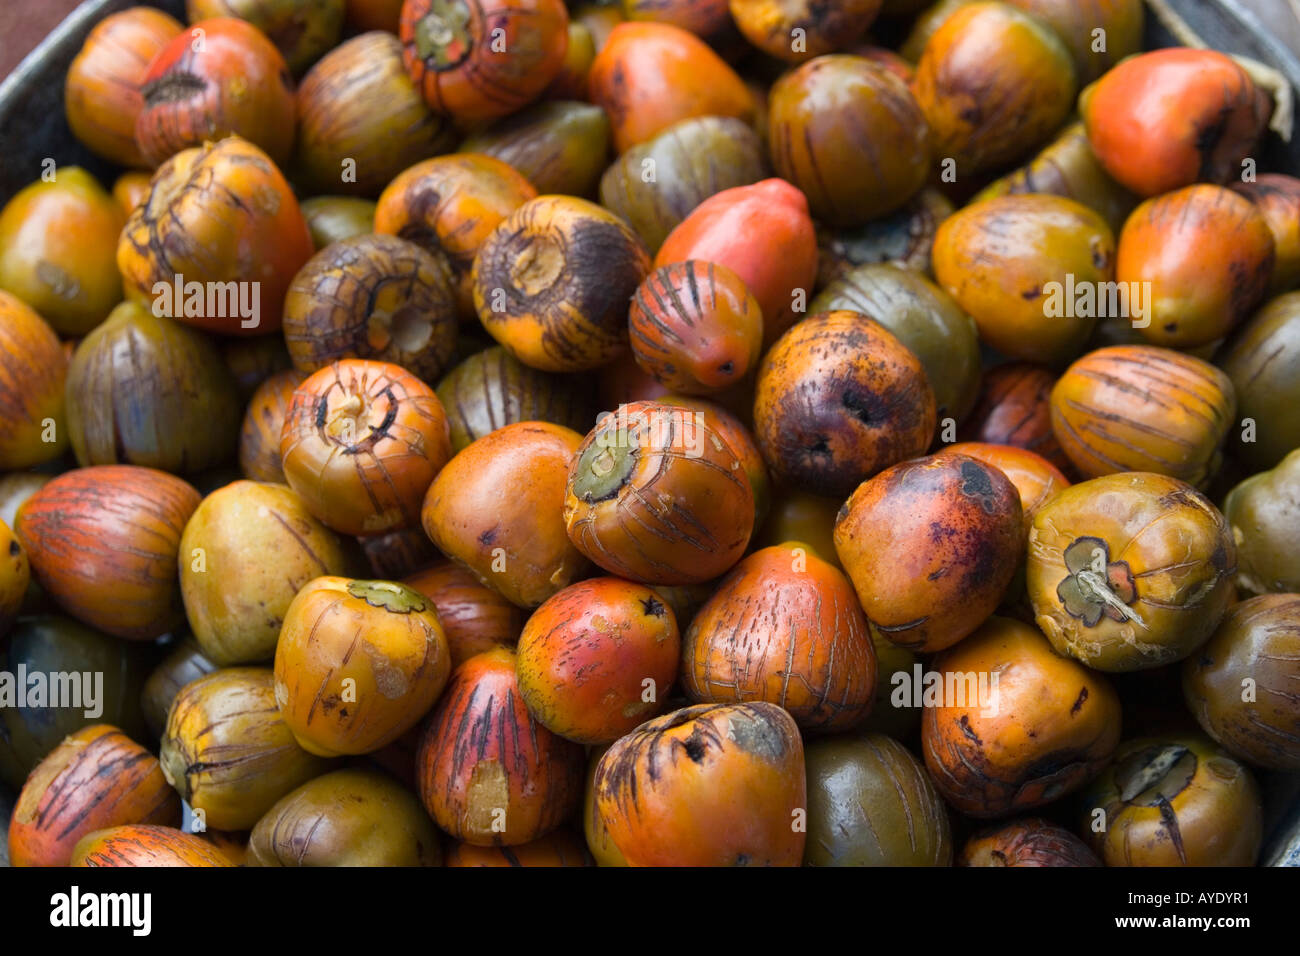 Bactris gasipaes K for sale at a road side market in Costa Rica, Central America Stock Photo